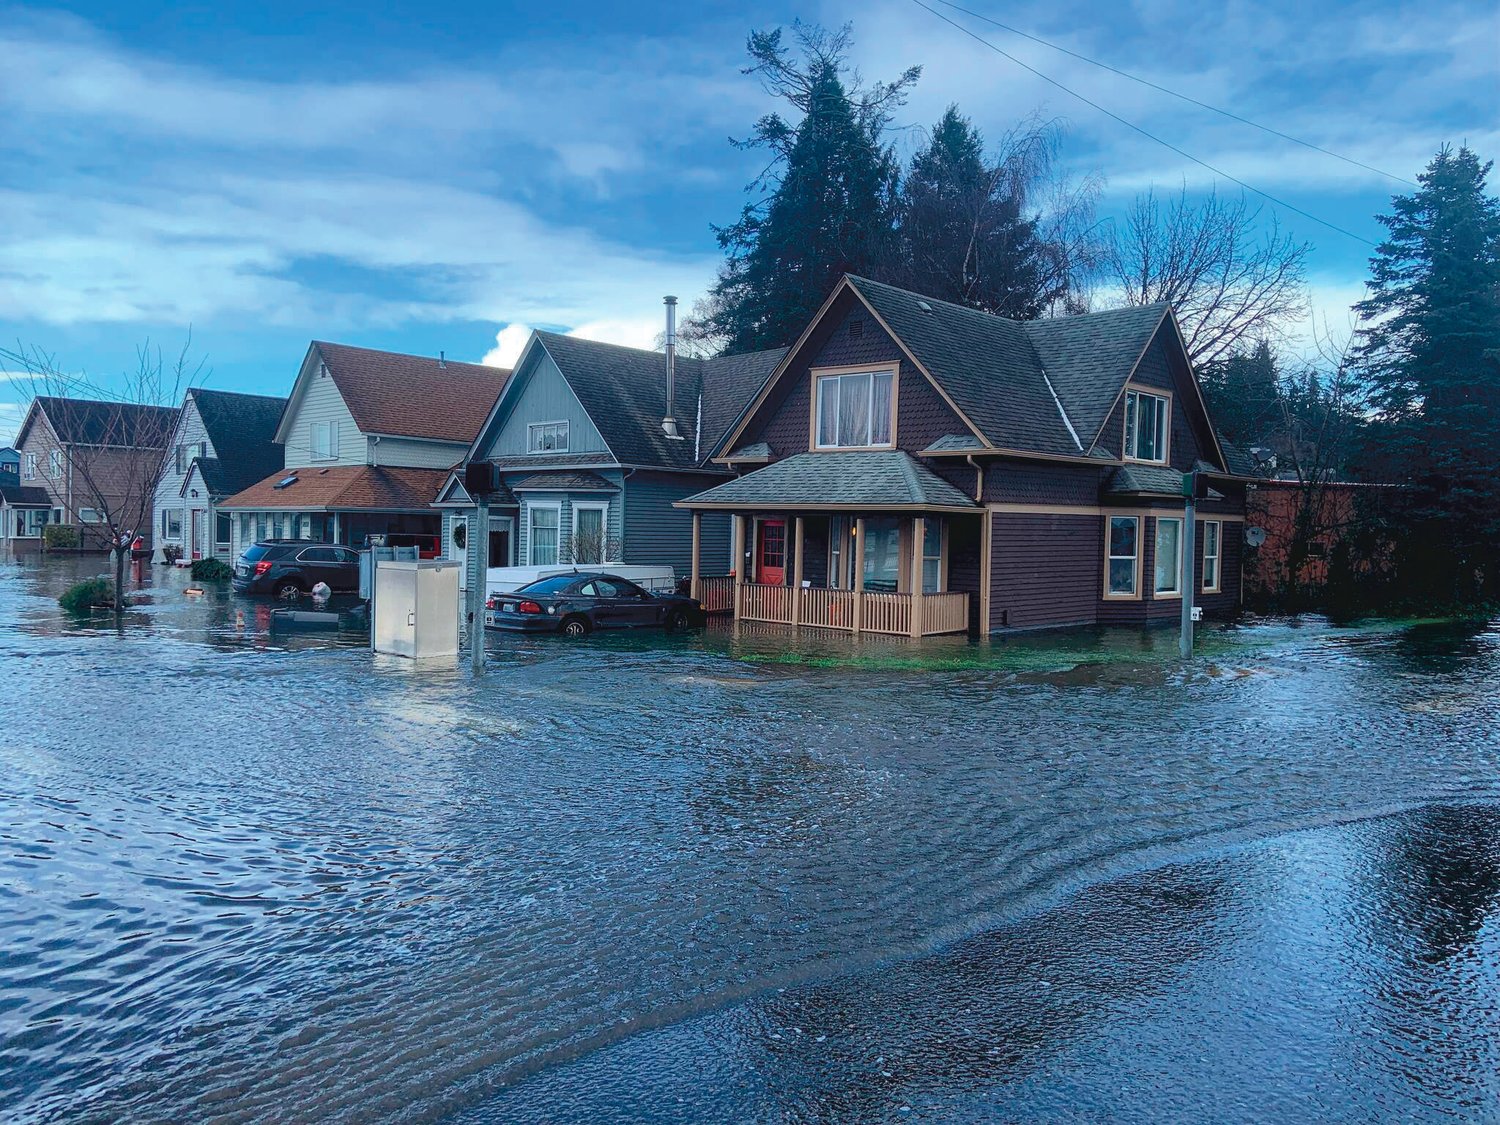 A Hoquiam neighborhood is seen flooded earlier this week in this photograph provided by The Daily World.